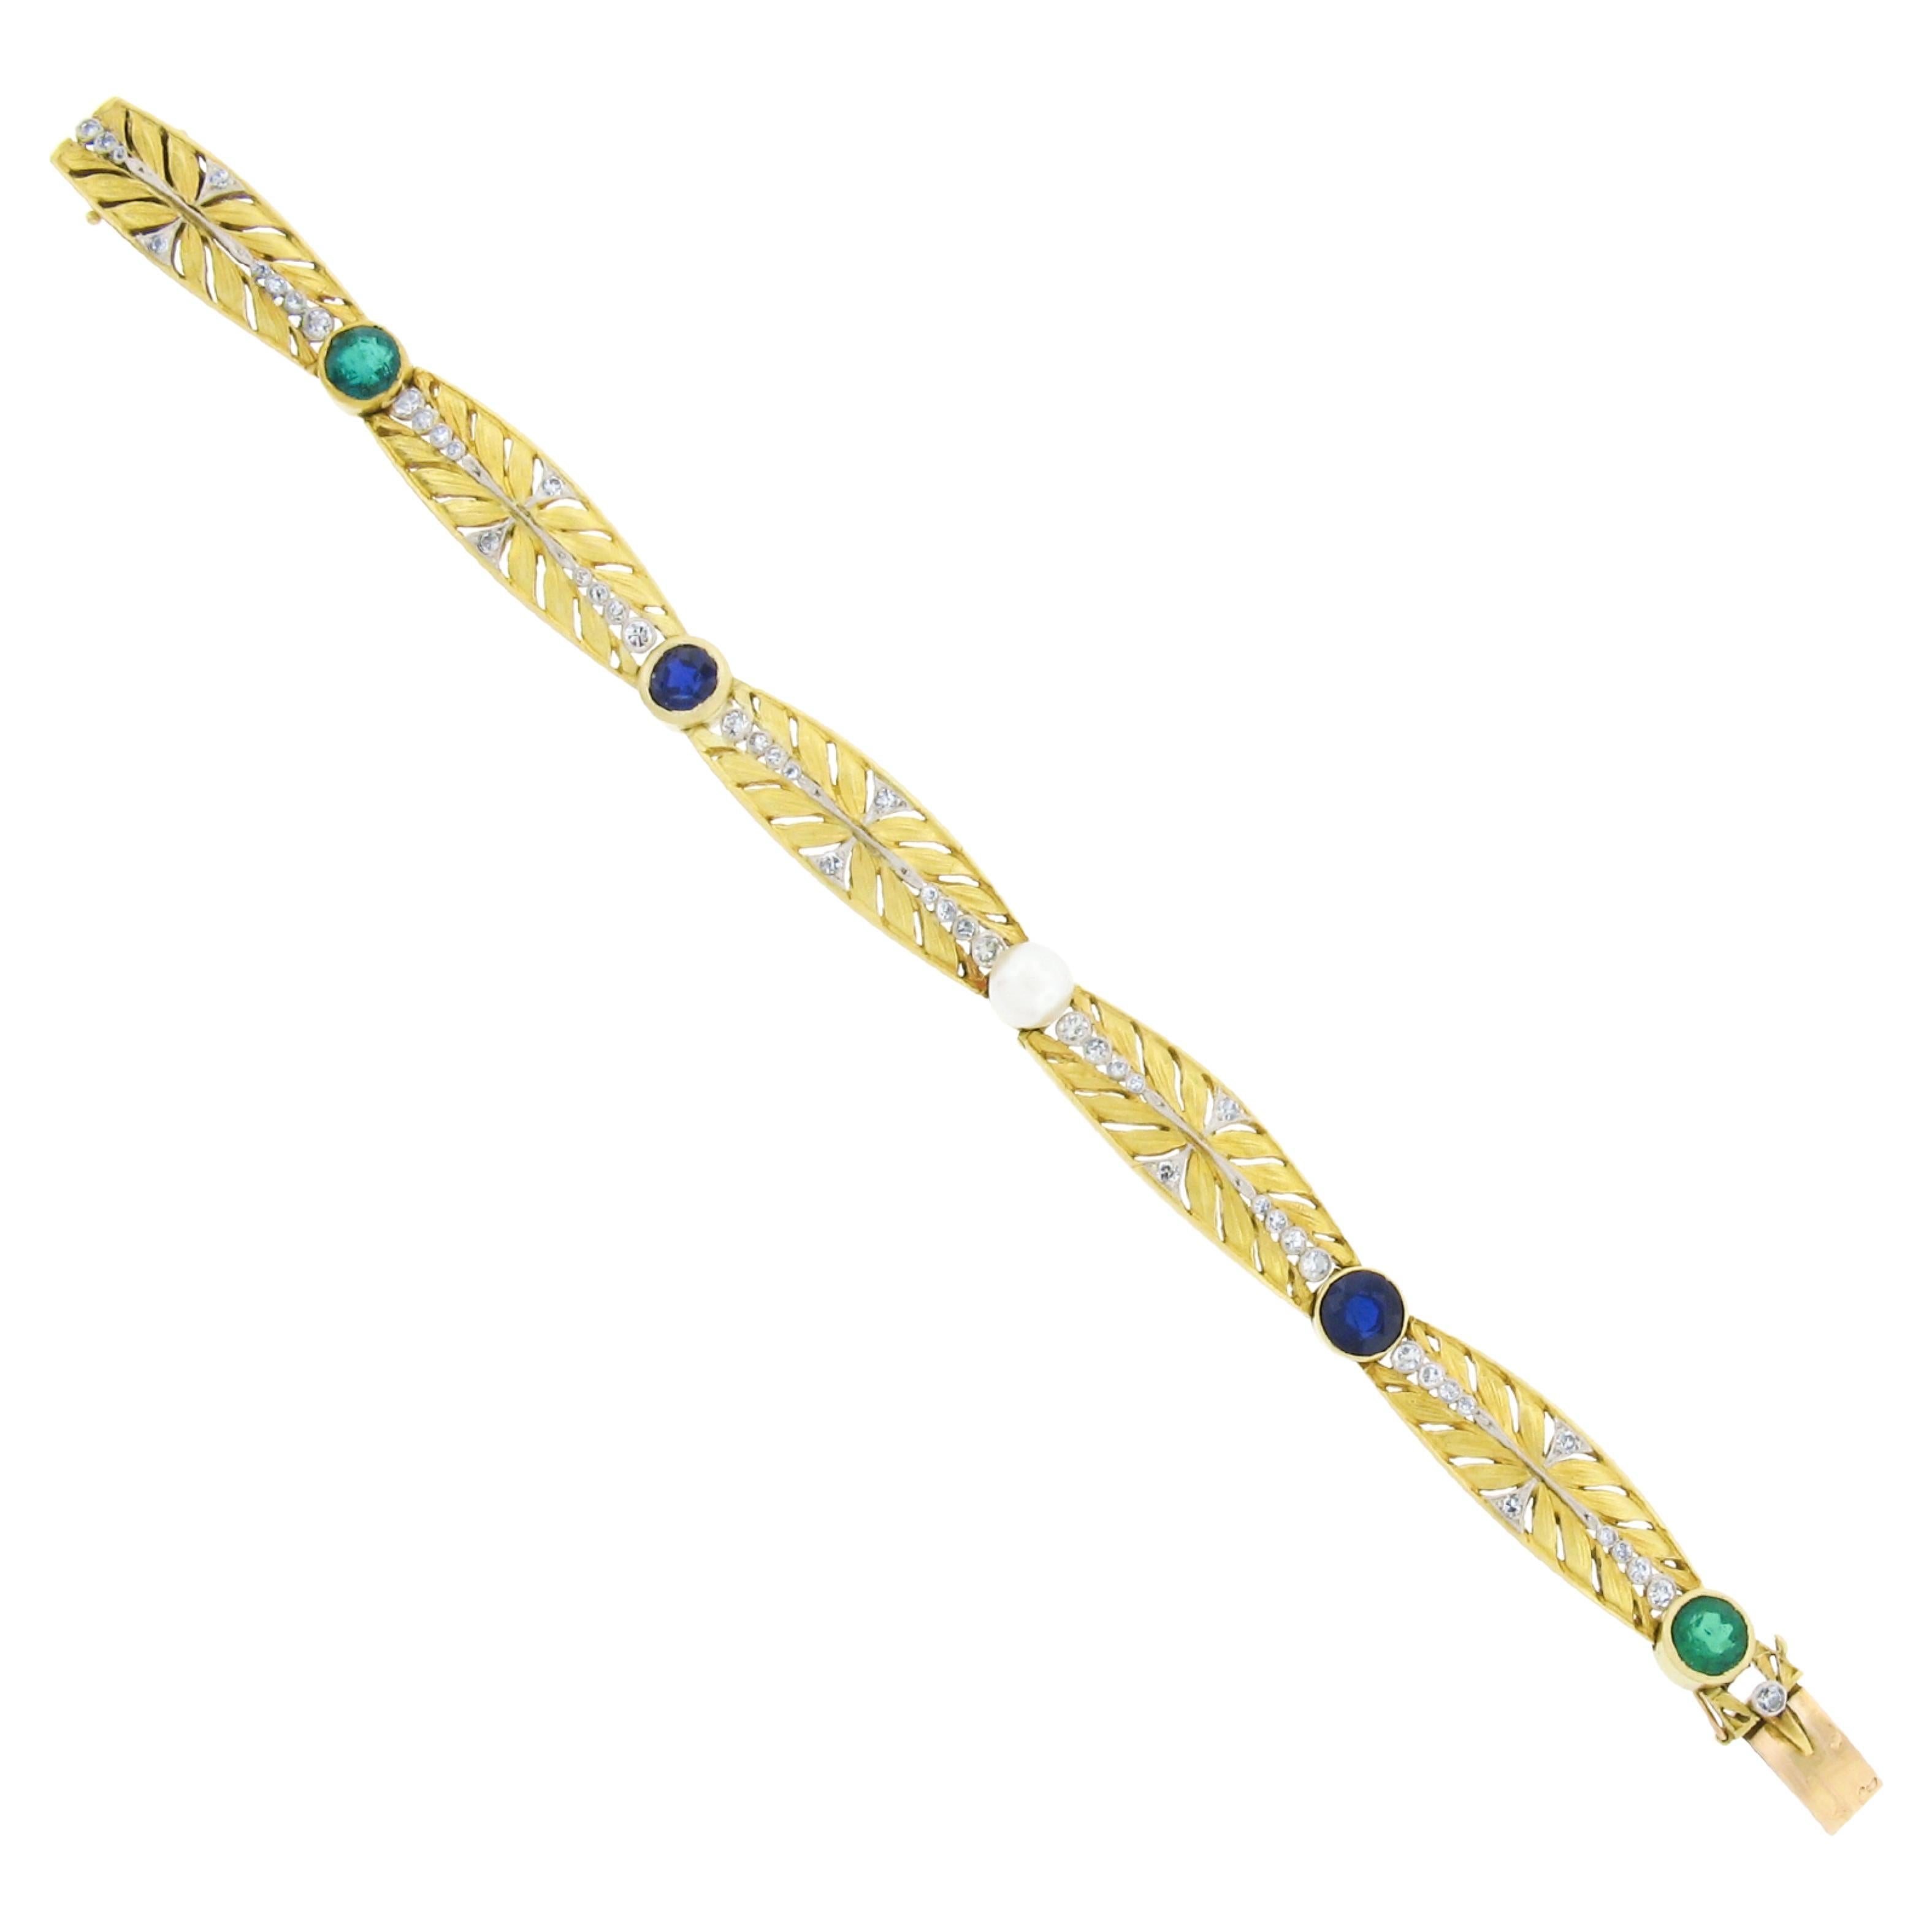 Antique French 18k Gold Plat, GIA Pearl Sapphire Emerald Engraved Link Bracelet